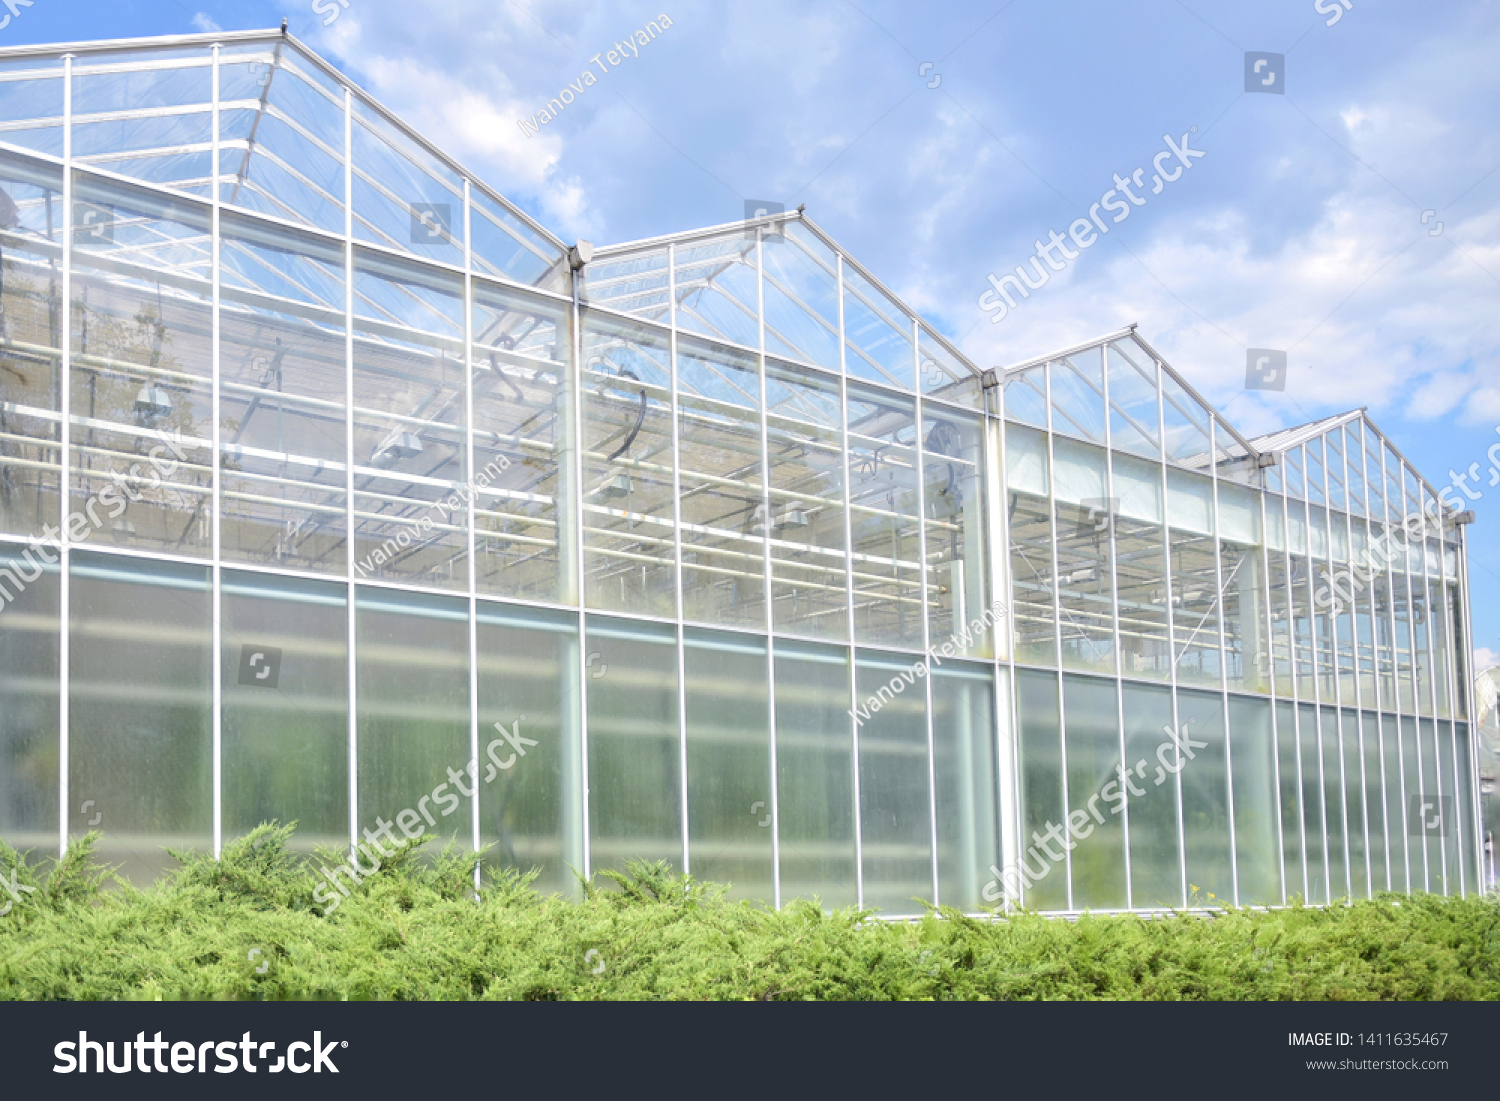 Big industrial greenhouse from glass panels on blue sky background. Agriculture glasshouse for growing plants. Transparent green house for growing organic vegetables. Cultivating agricultural plant #1411635467